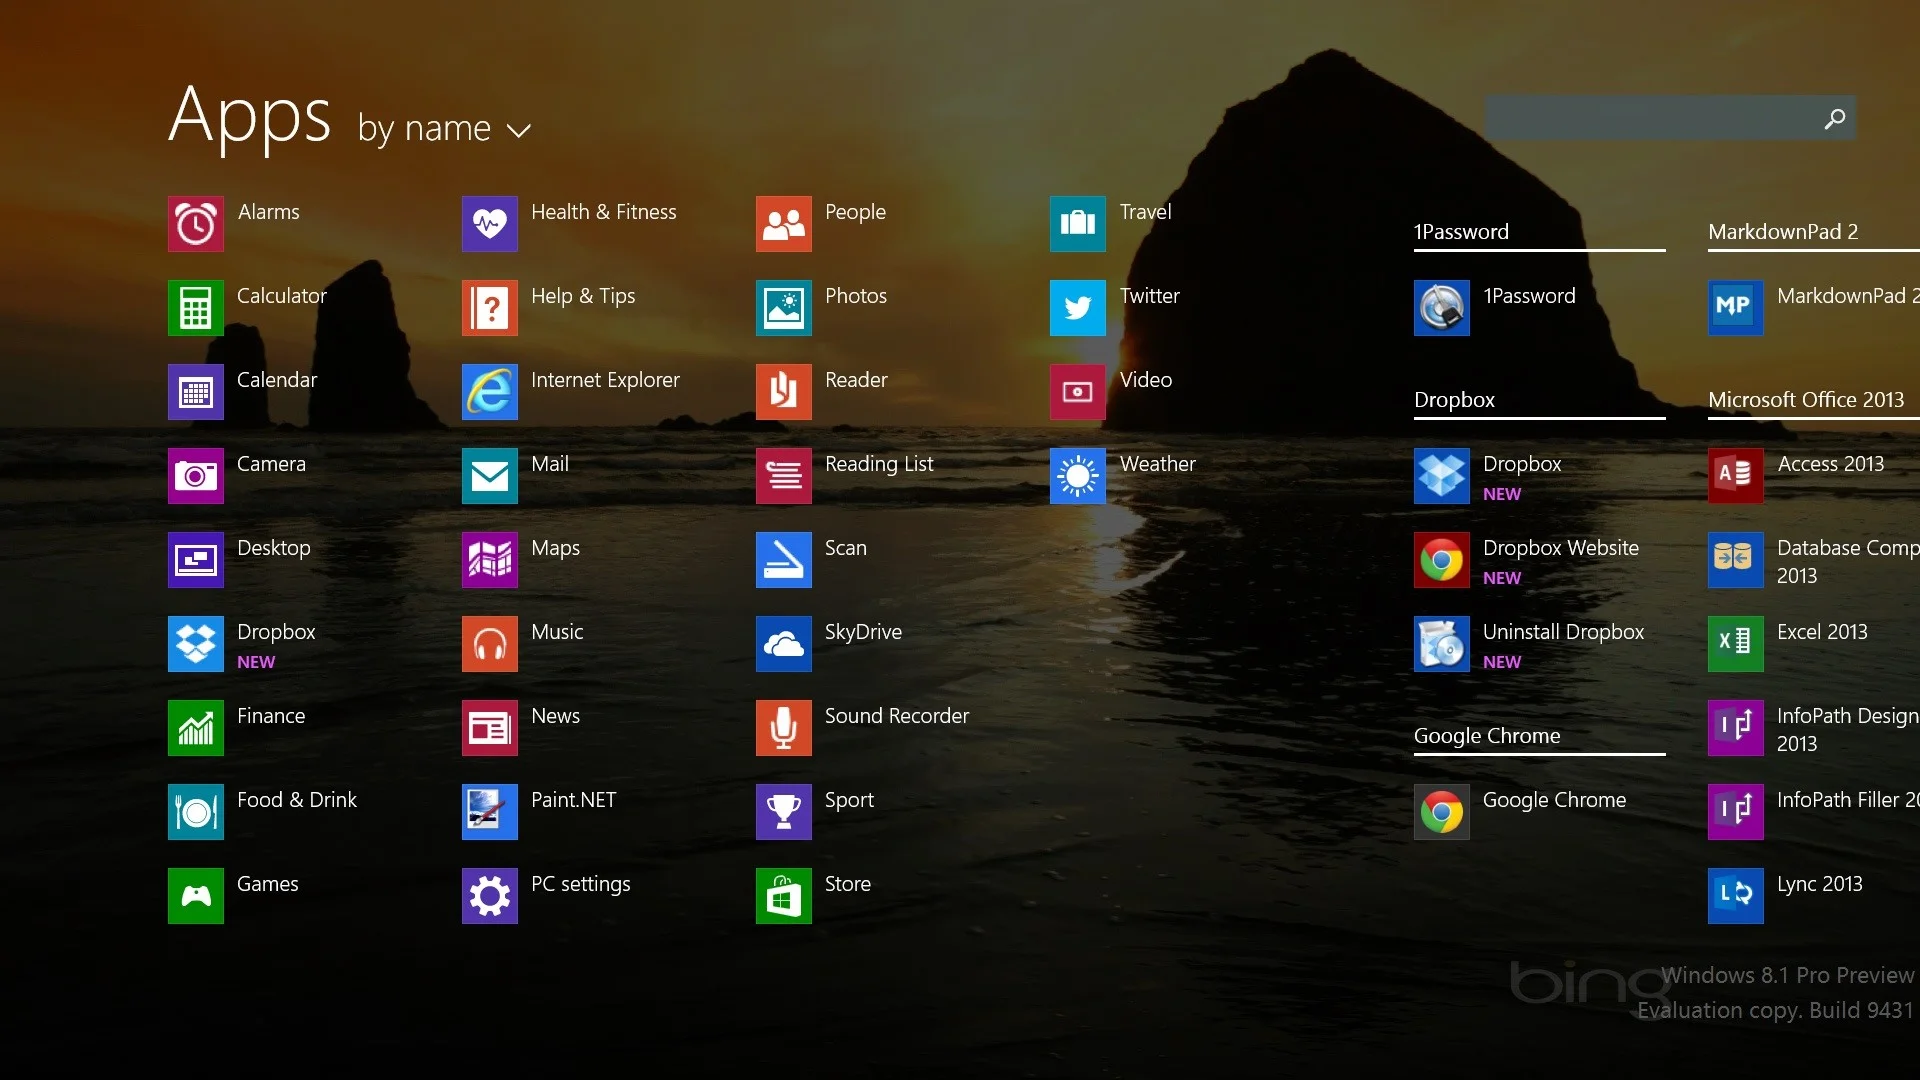 All apps, using the desktop background